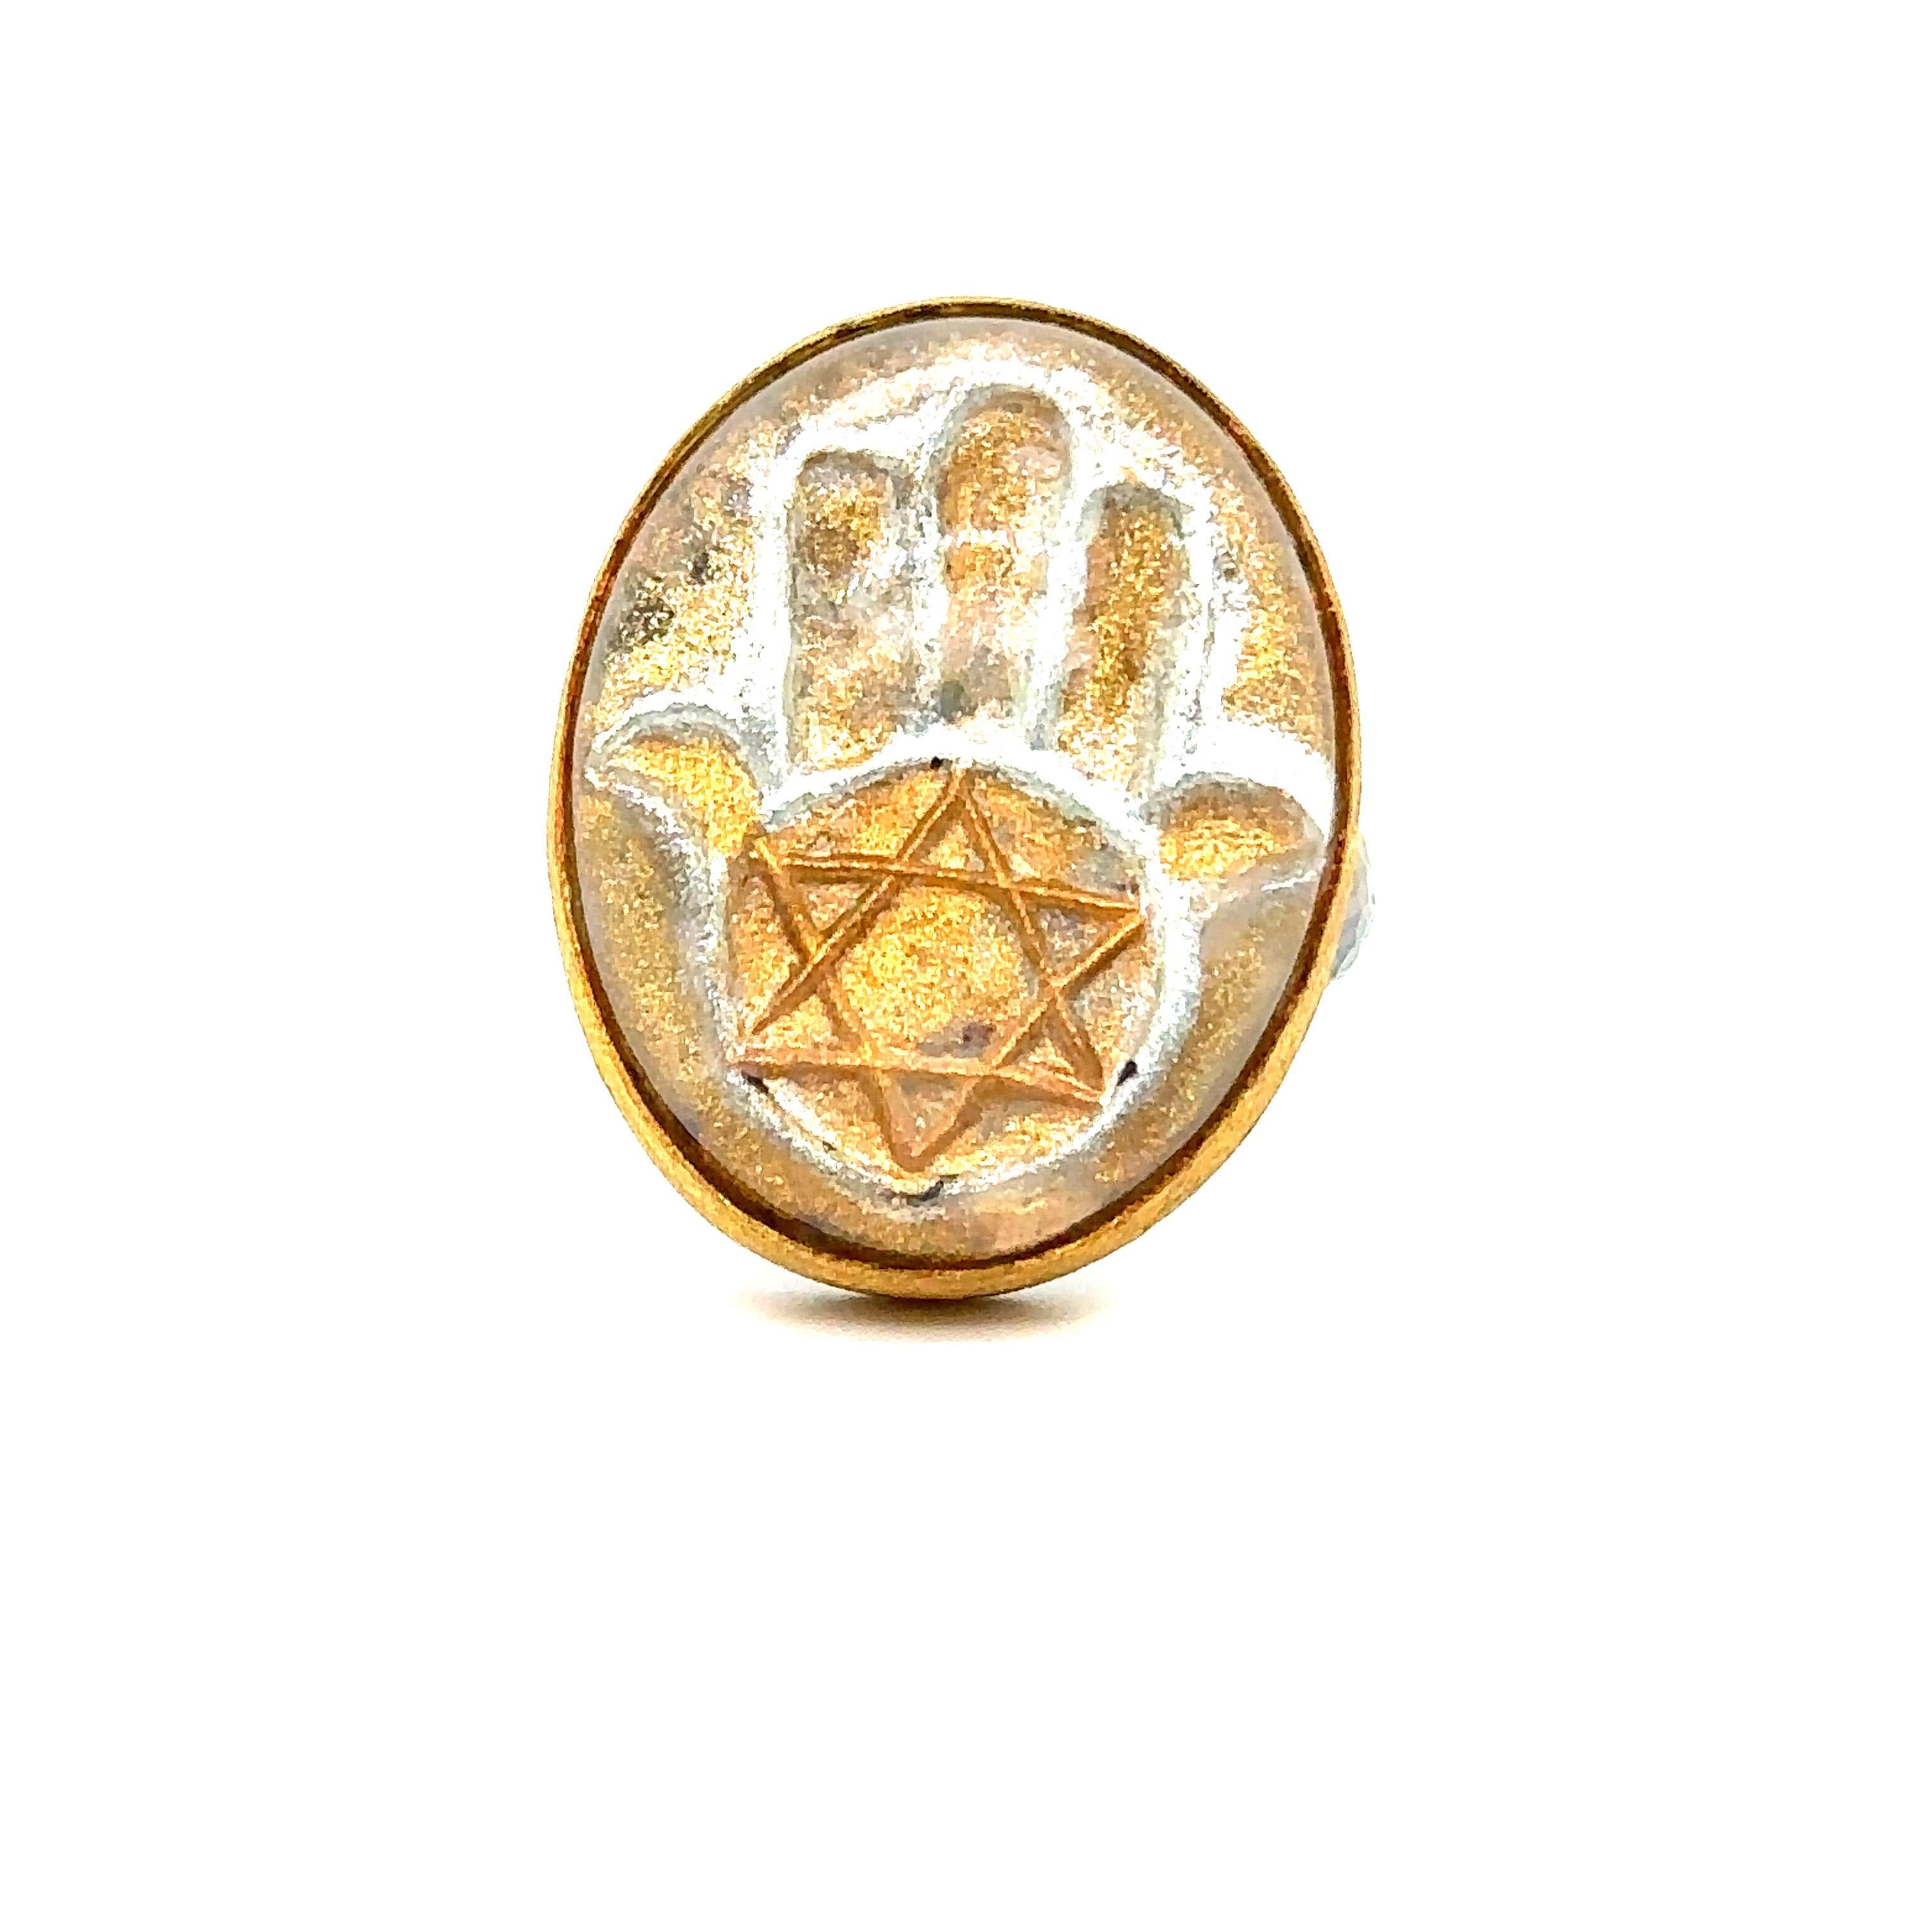 JAS-19-1818 - 24K GOLD/STERLING SILVER HAMSA RING with 30.00CT CARVED QUARTZ  For Sale 2